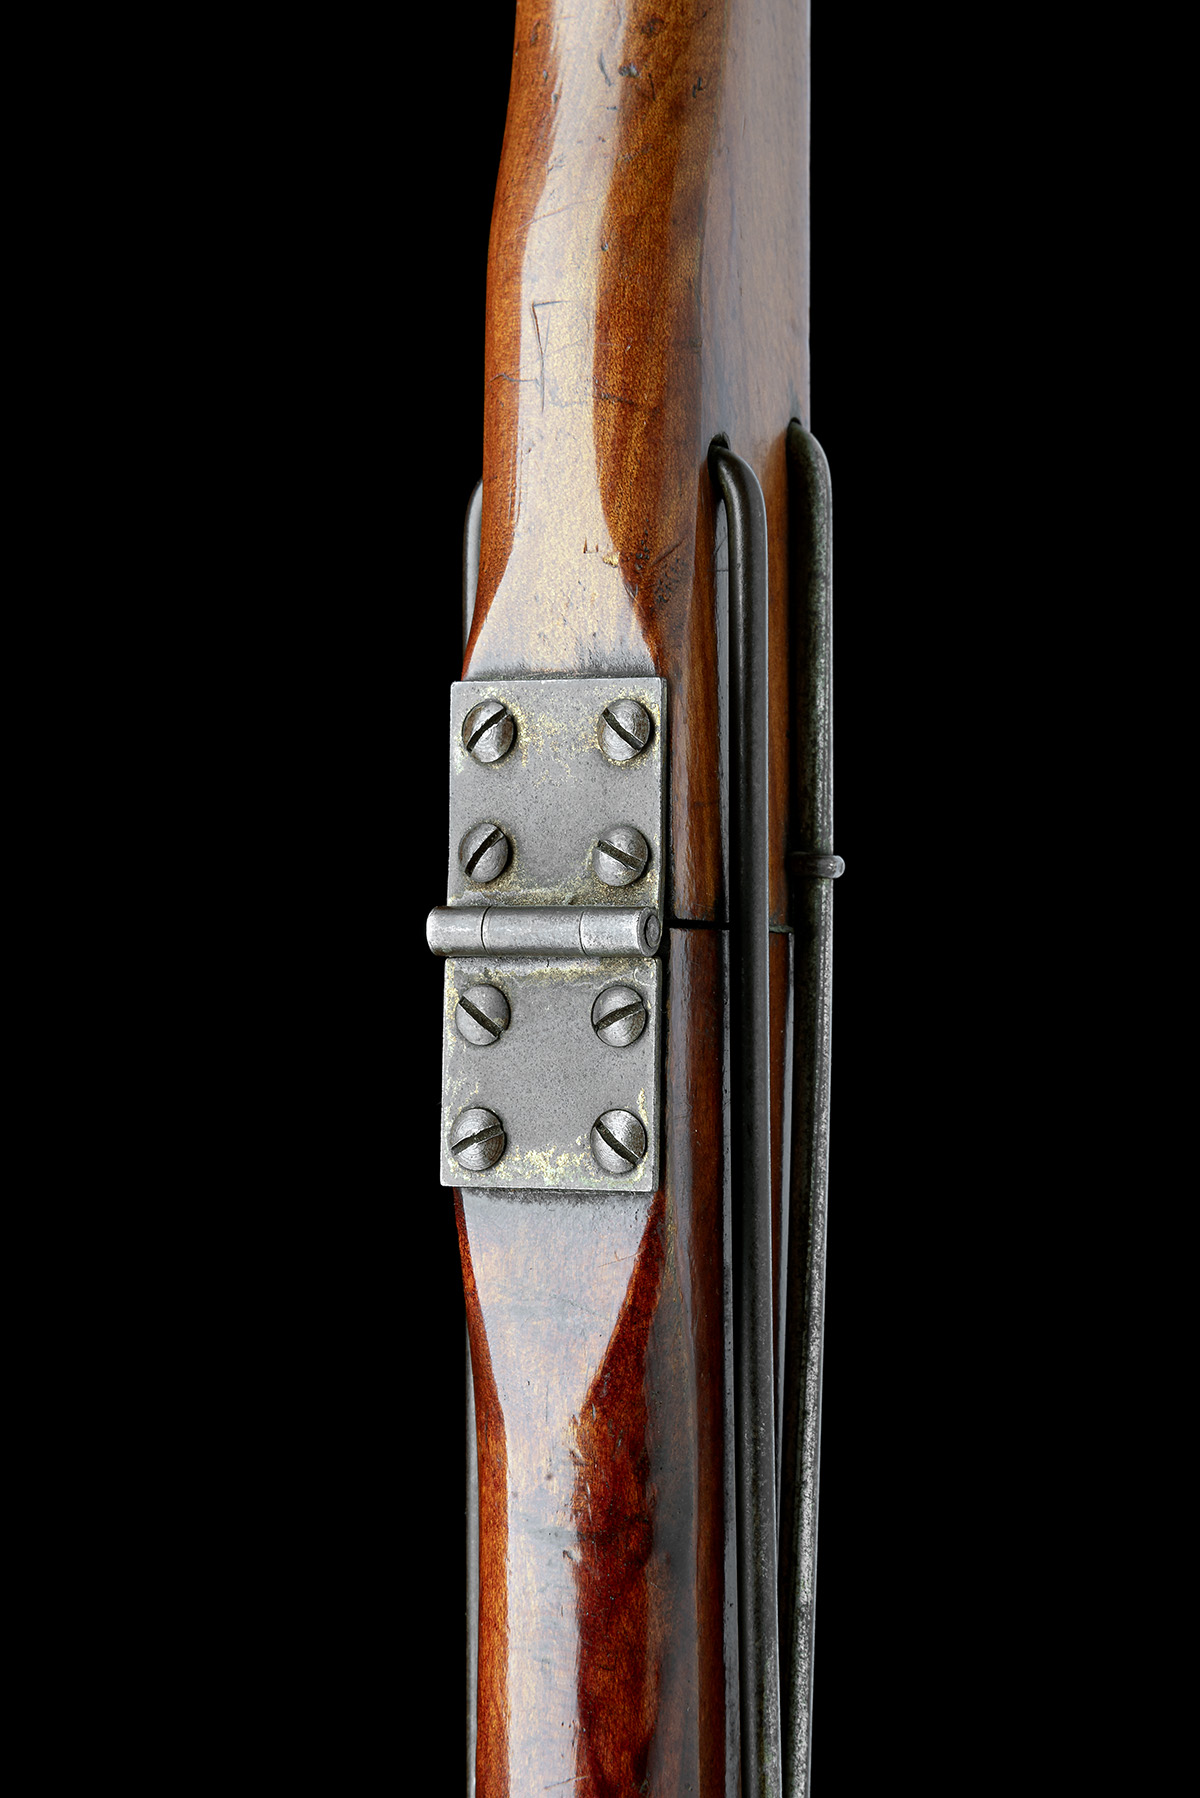 AN EXTREMELY RARE .180 MARKHAM'S PATENT CHICAGO MAPLEWOOD AIR-RIFLE, no visible serial number, - Image 9 of 9